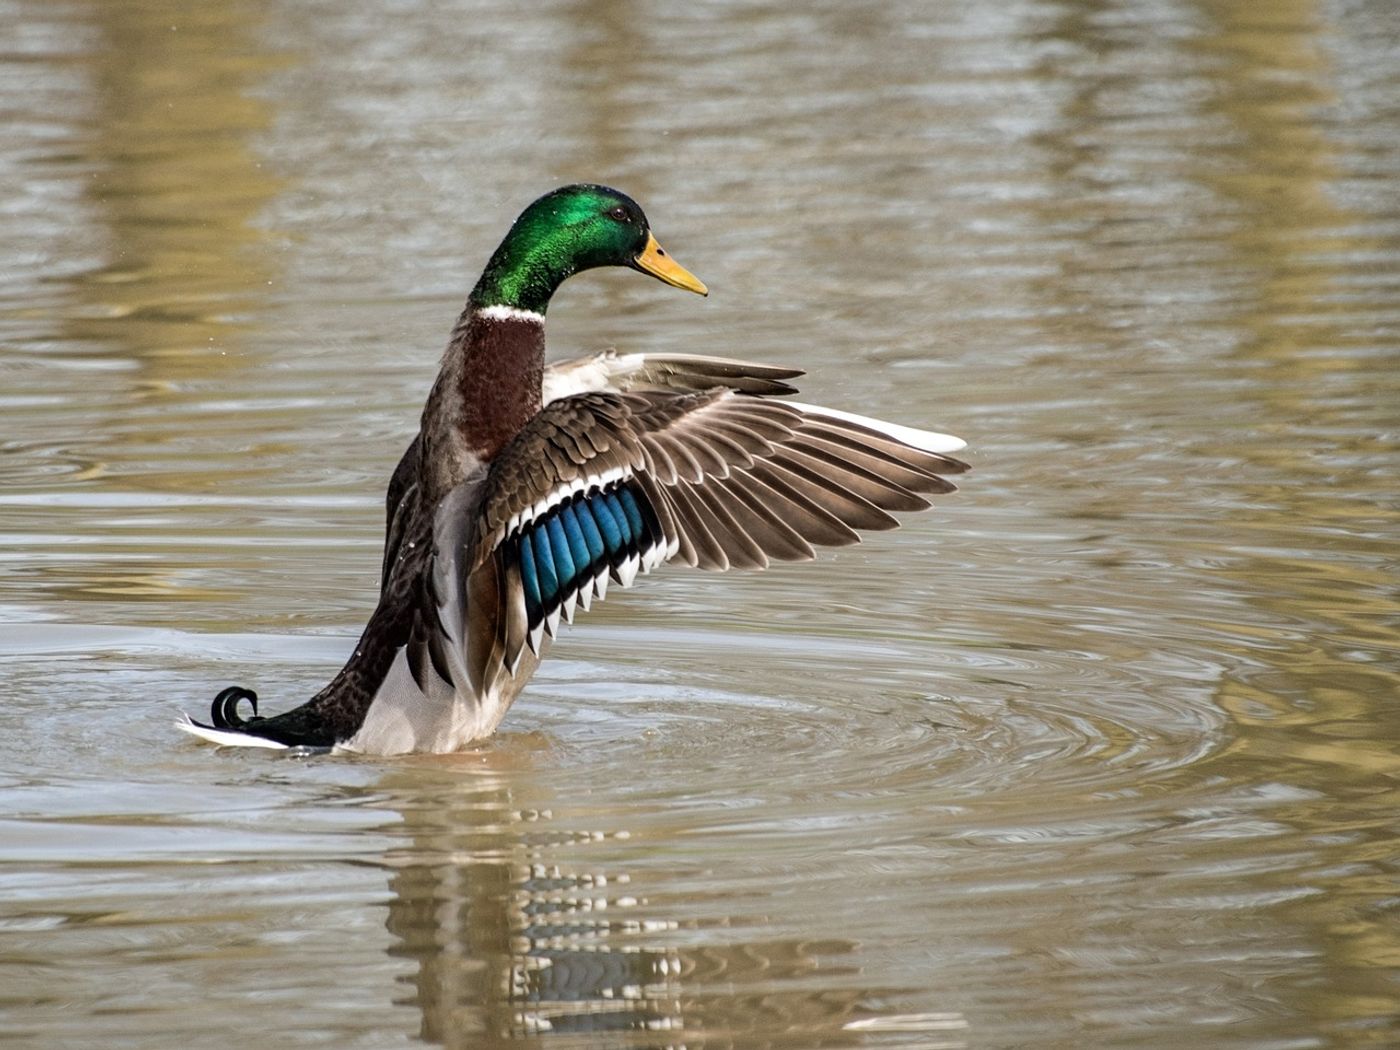 You've probably seen mallard ducks at your local wildlife park, and they're typically non-aggressive and graceful creatures that feed on passive food sources.